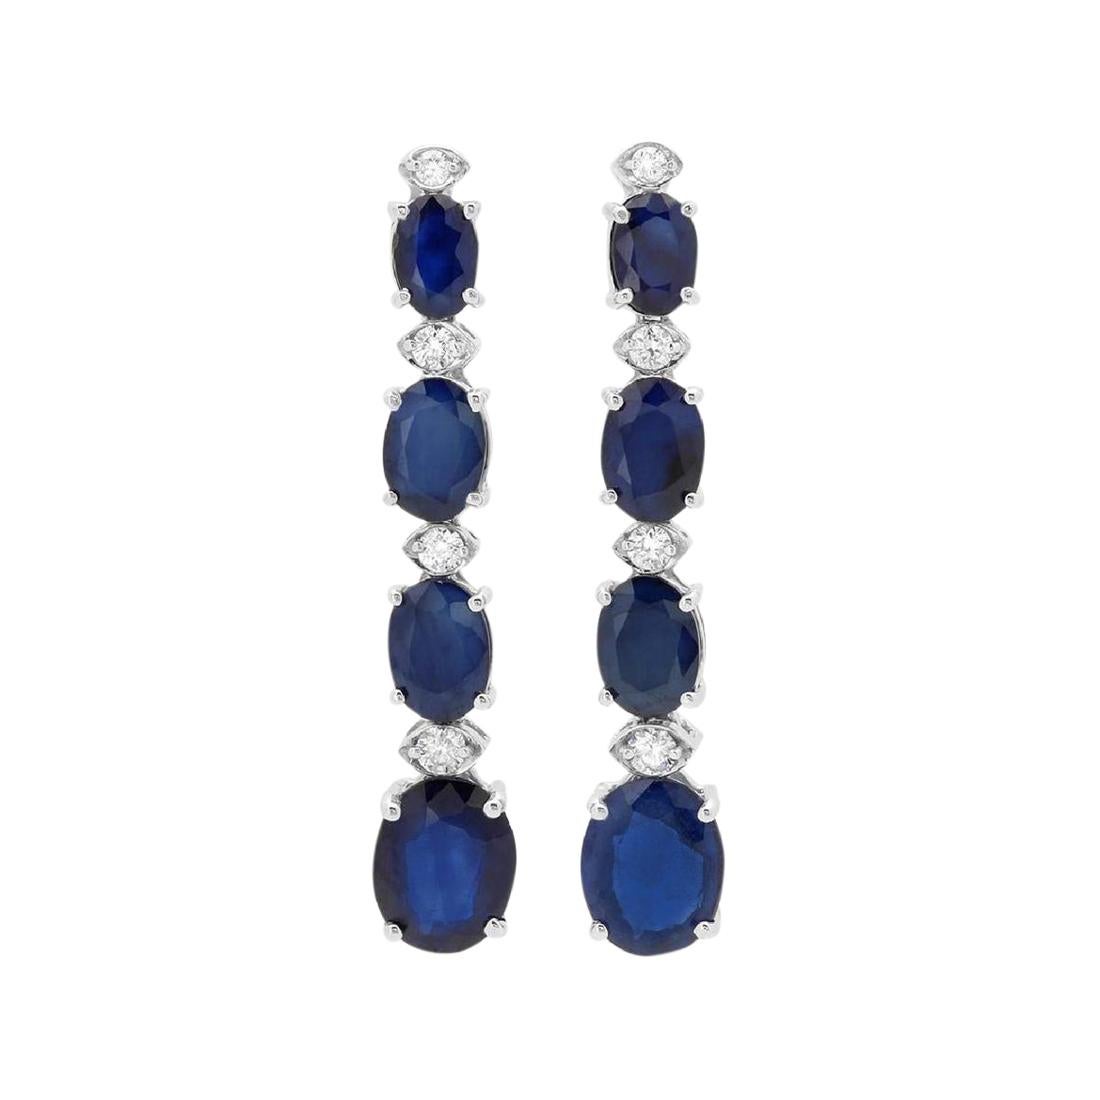 Exquisite 10.40 Carat Natural Sapphire and Diamond 14K Solid White Gold Earring